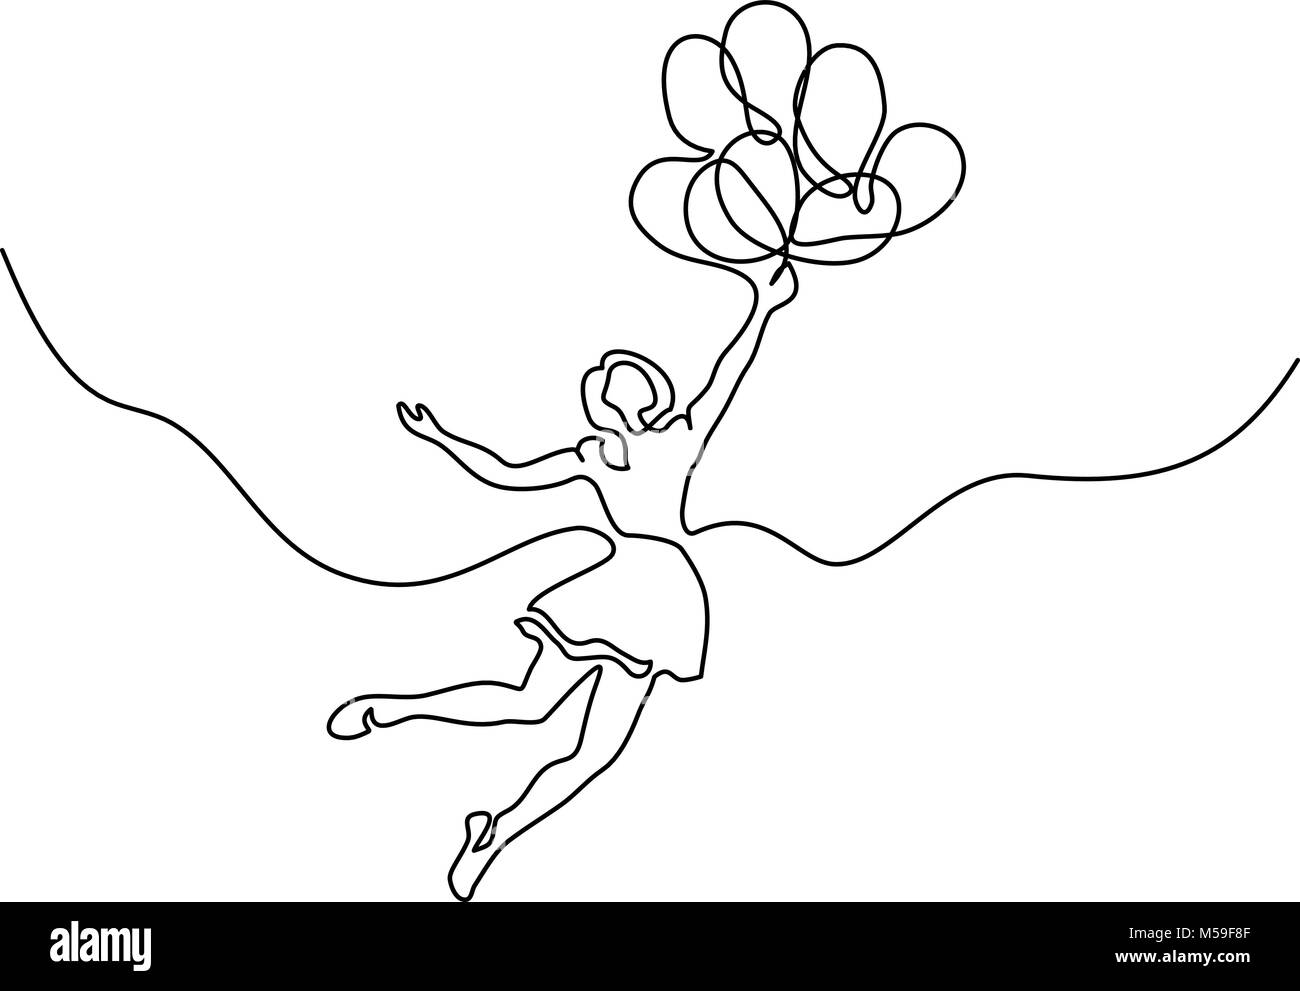 Girl flying in air with balloons Stock Vector